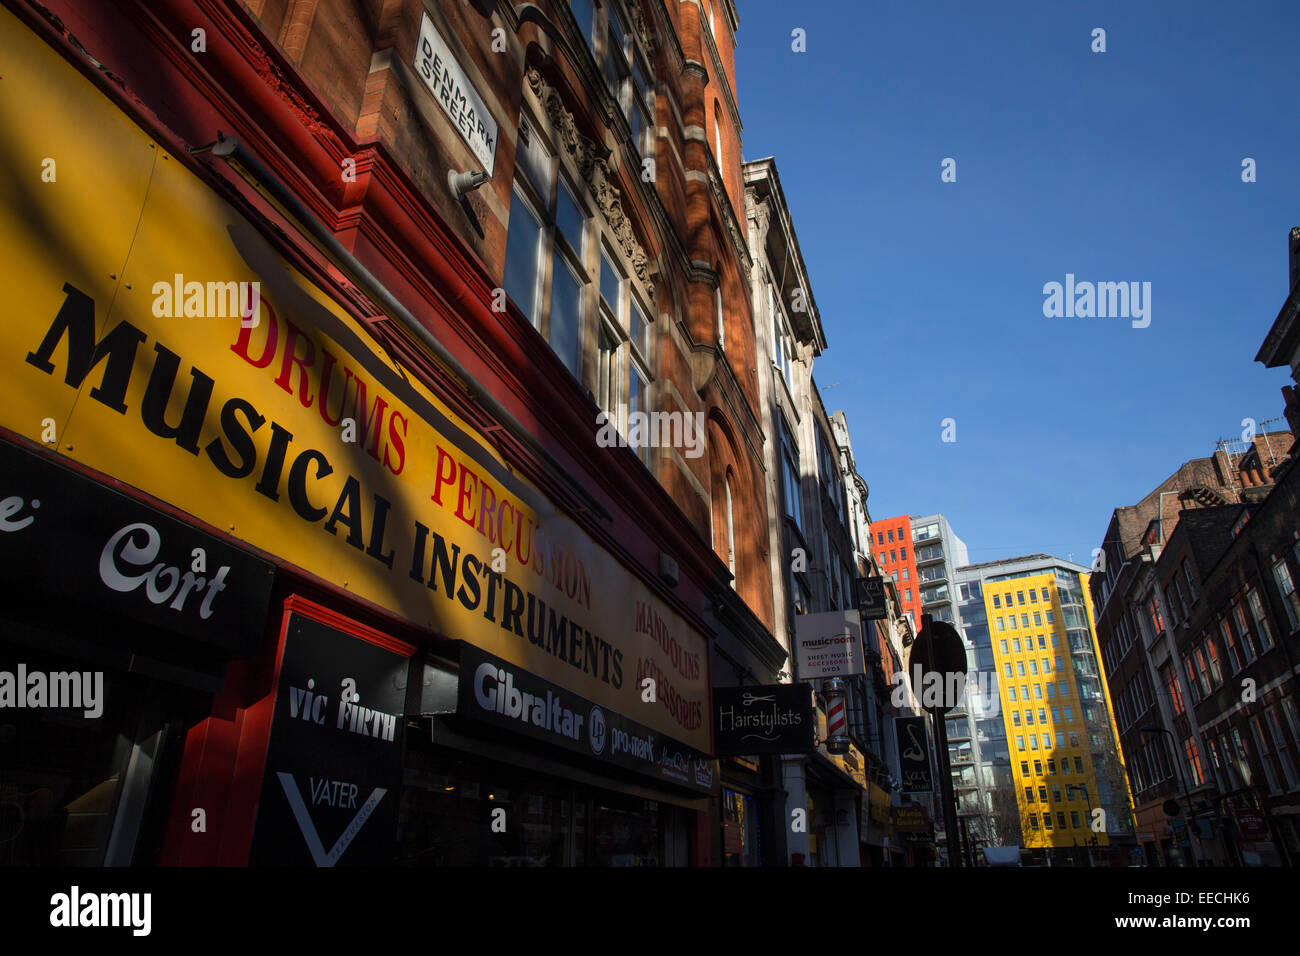 London's historic Denmark Street set for demolition to make way for Crossrail underground extension project. Stock Photo